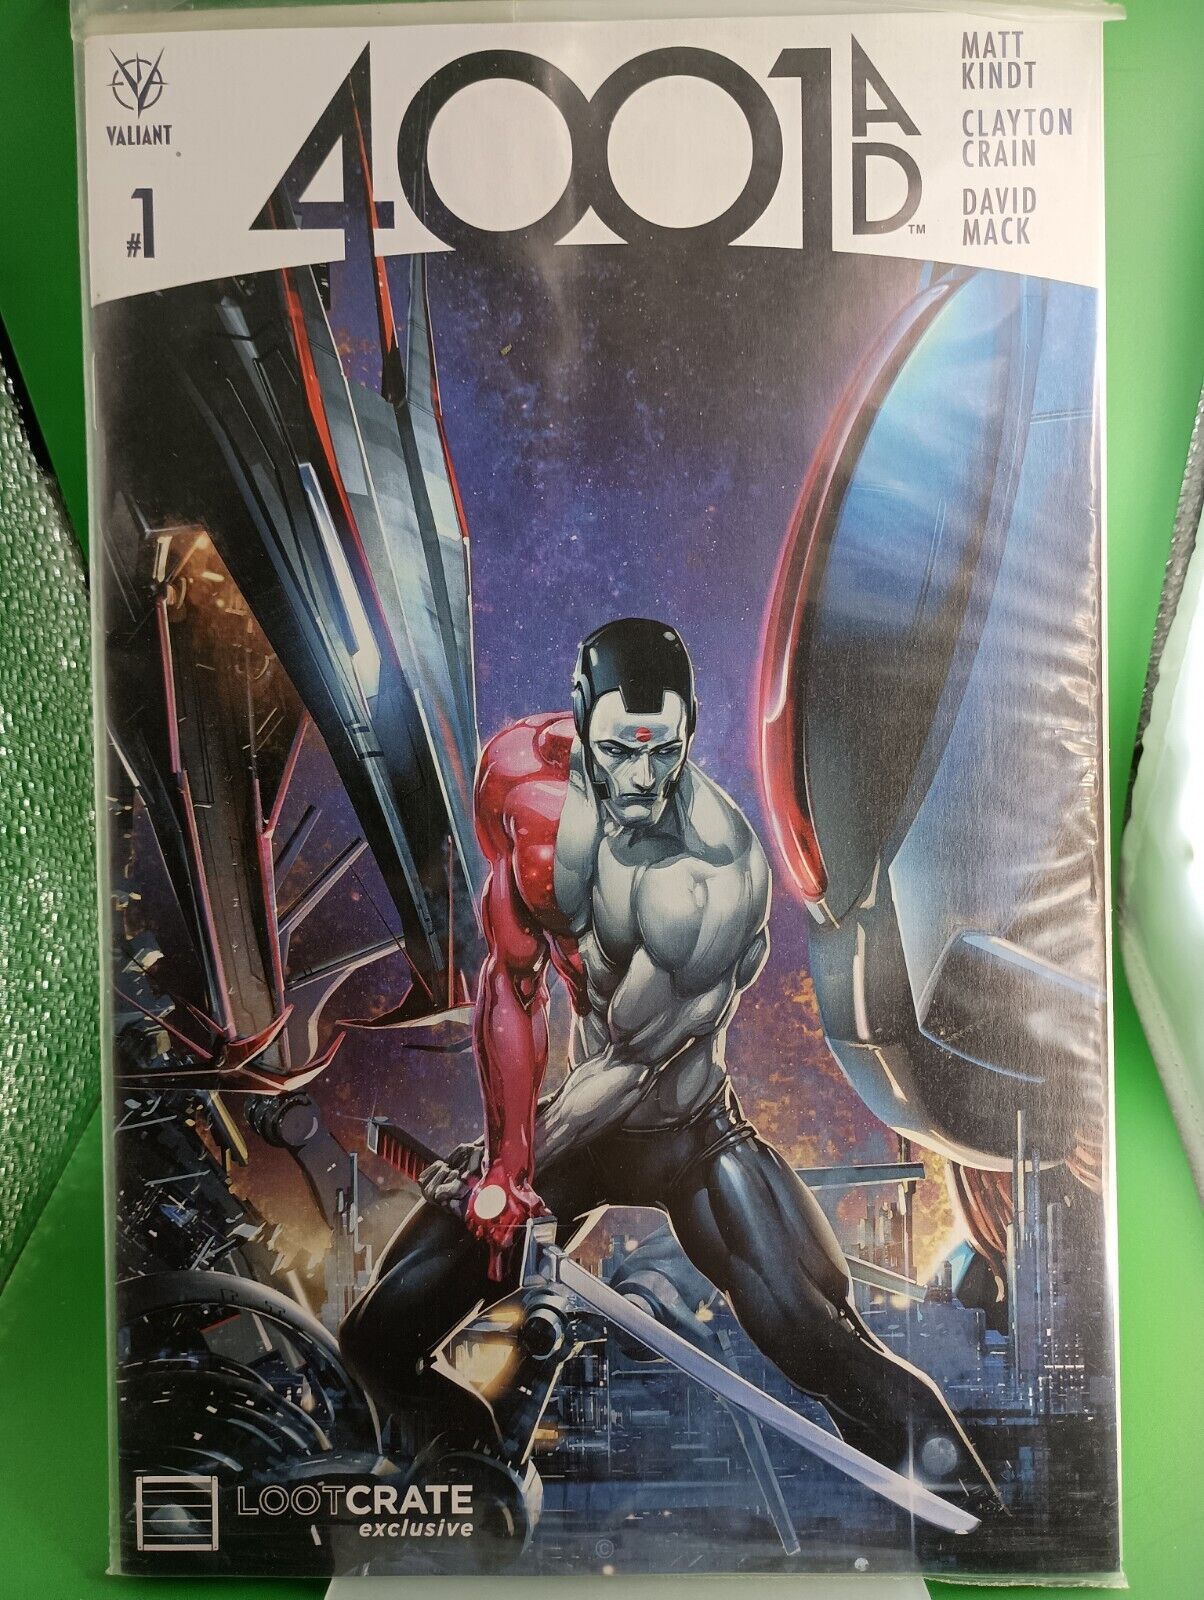 SEALED 2016 Valiant Comics 4001 A.D. Issue 1 Clayton Crain Lootcrate Exclusive